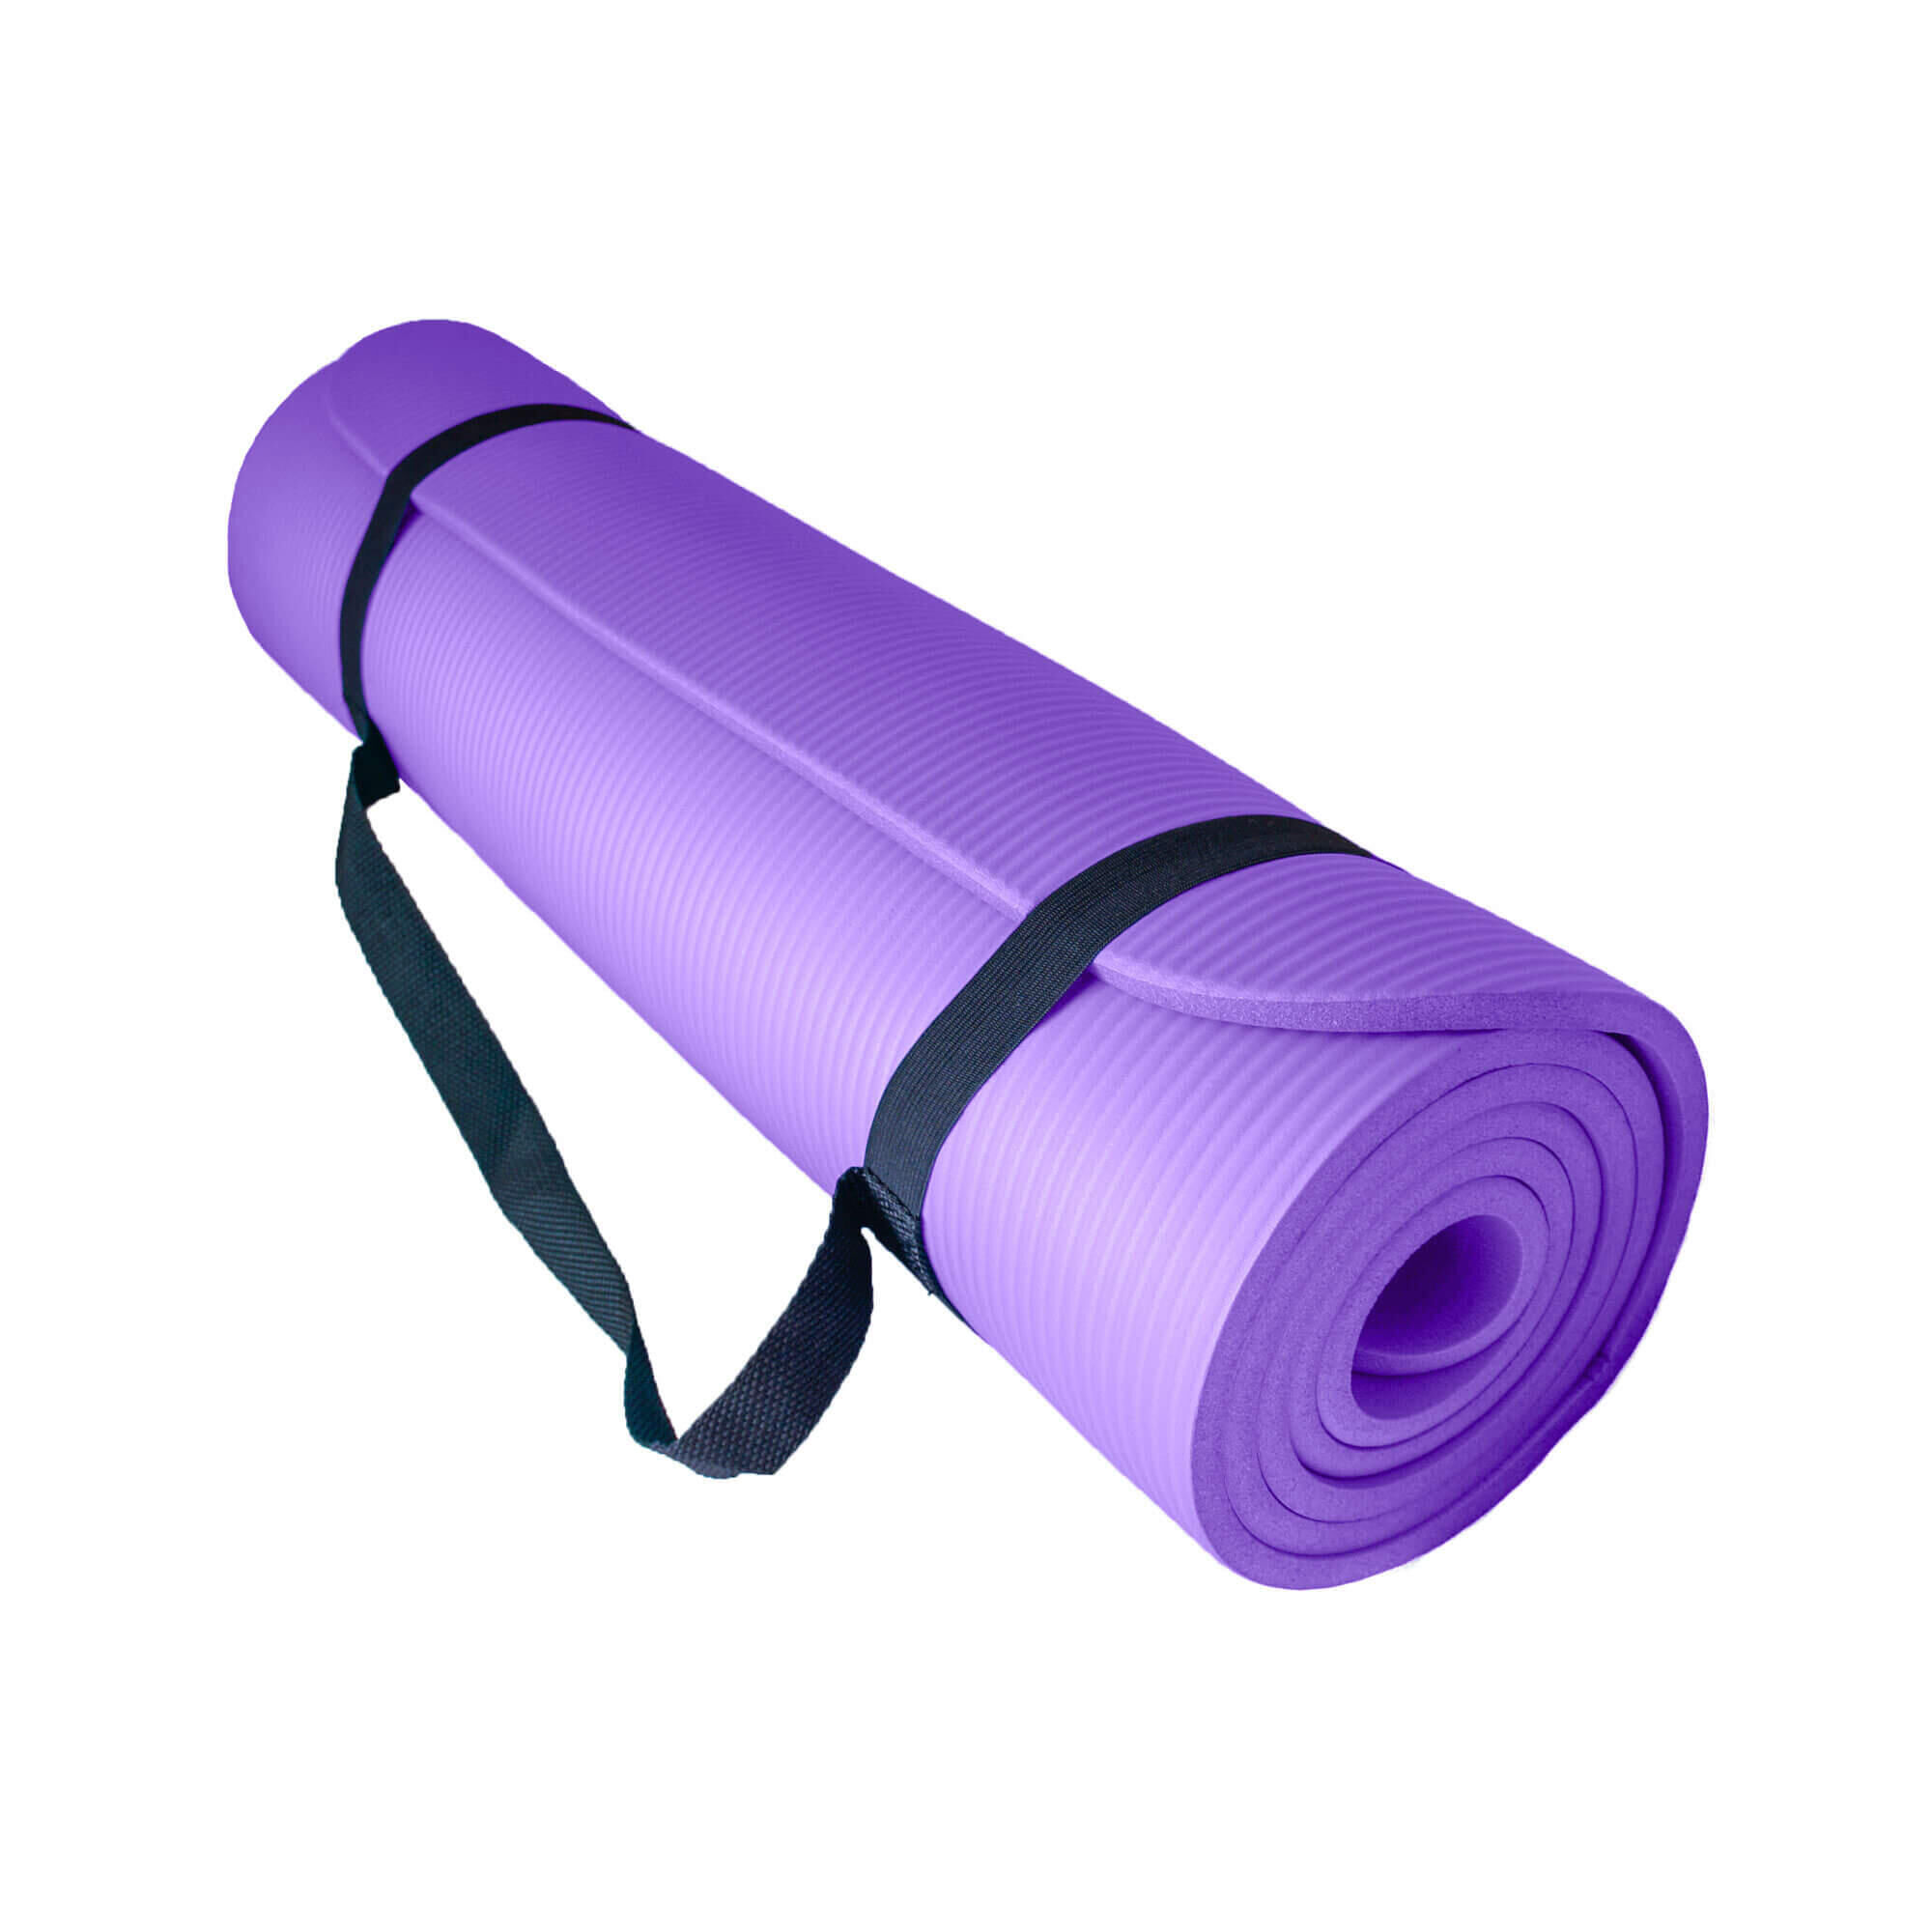 Yoga Mat Blooming Plum Blossom Non Slip Fitness Exercise Mat Extra Thick  Yoga Mats for home workout, Pilates, Yoga and Floor Workouts 71 x 26 Inches